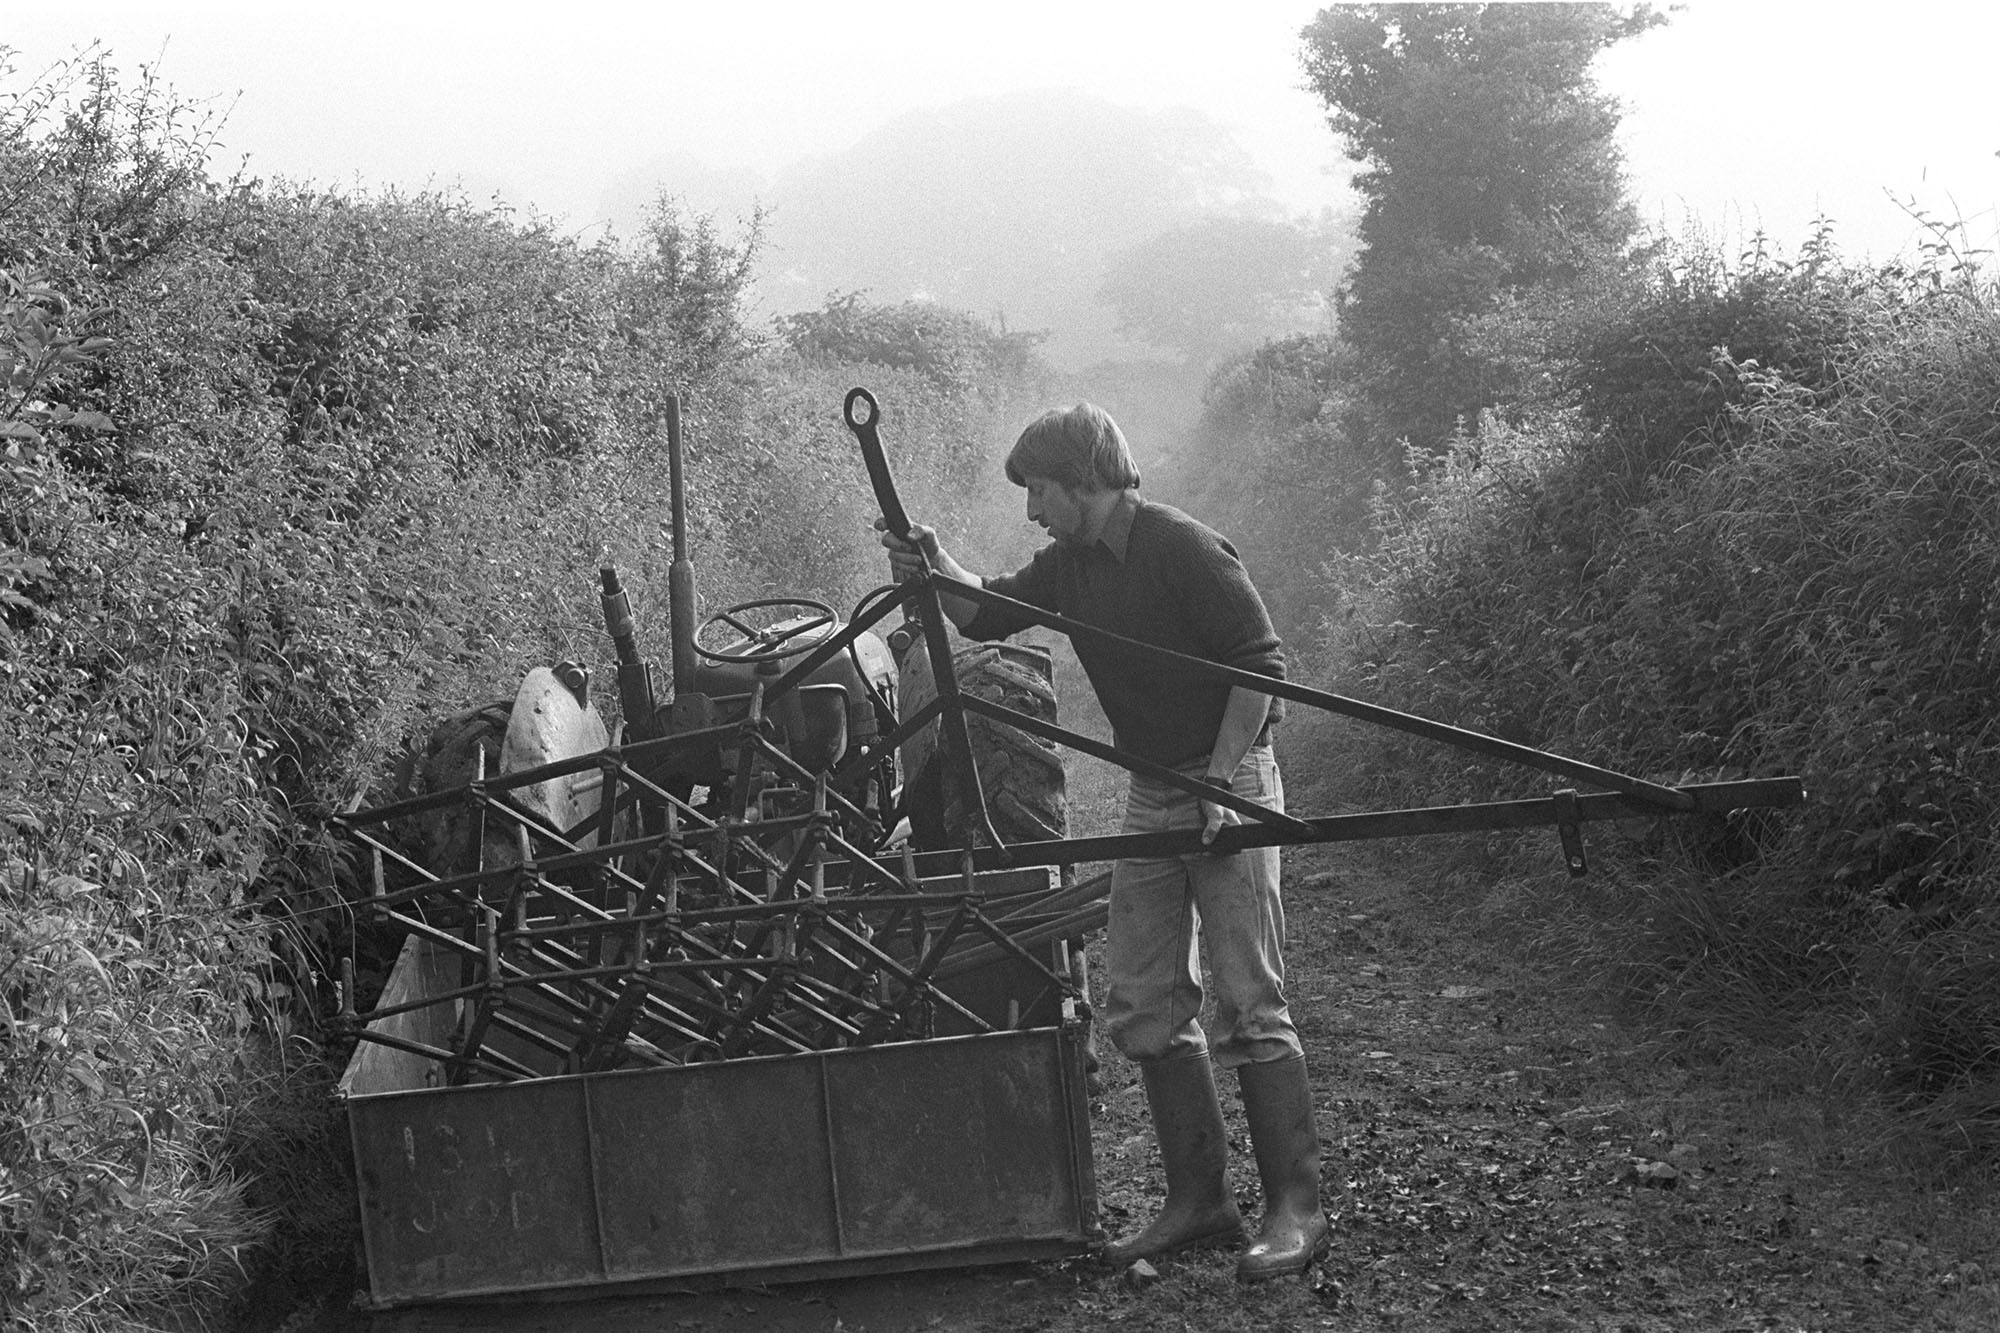 Farmer loading harrow on to tractor with link box, early morning mist. 
[Simon Berry loading a harrow into a link box attached to a tractor, in a lane at South Harepath, Beaford. The lane is covered with early morning mist.]